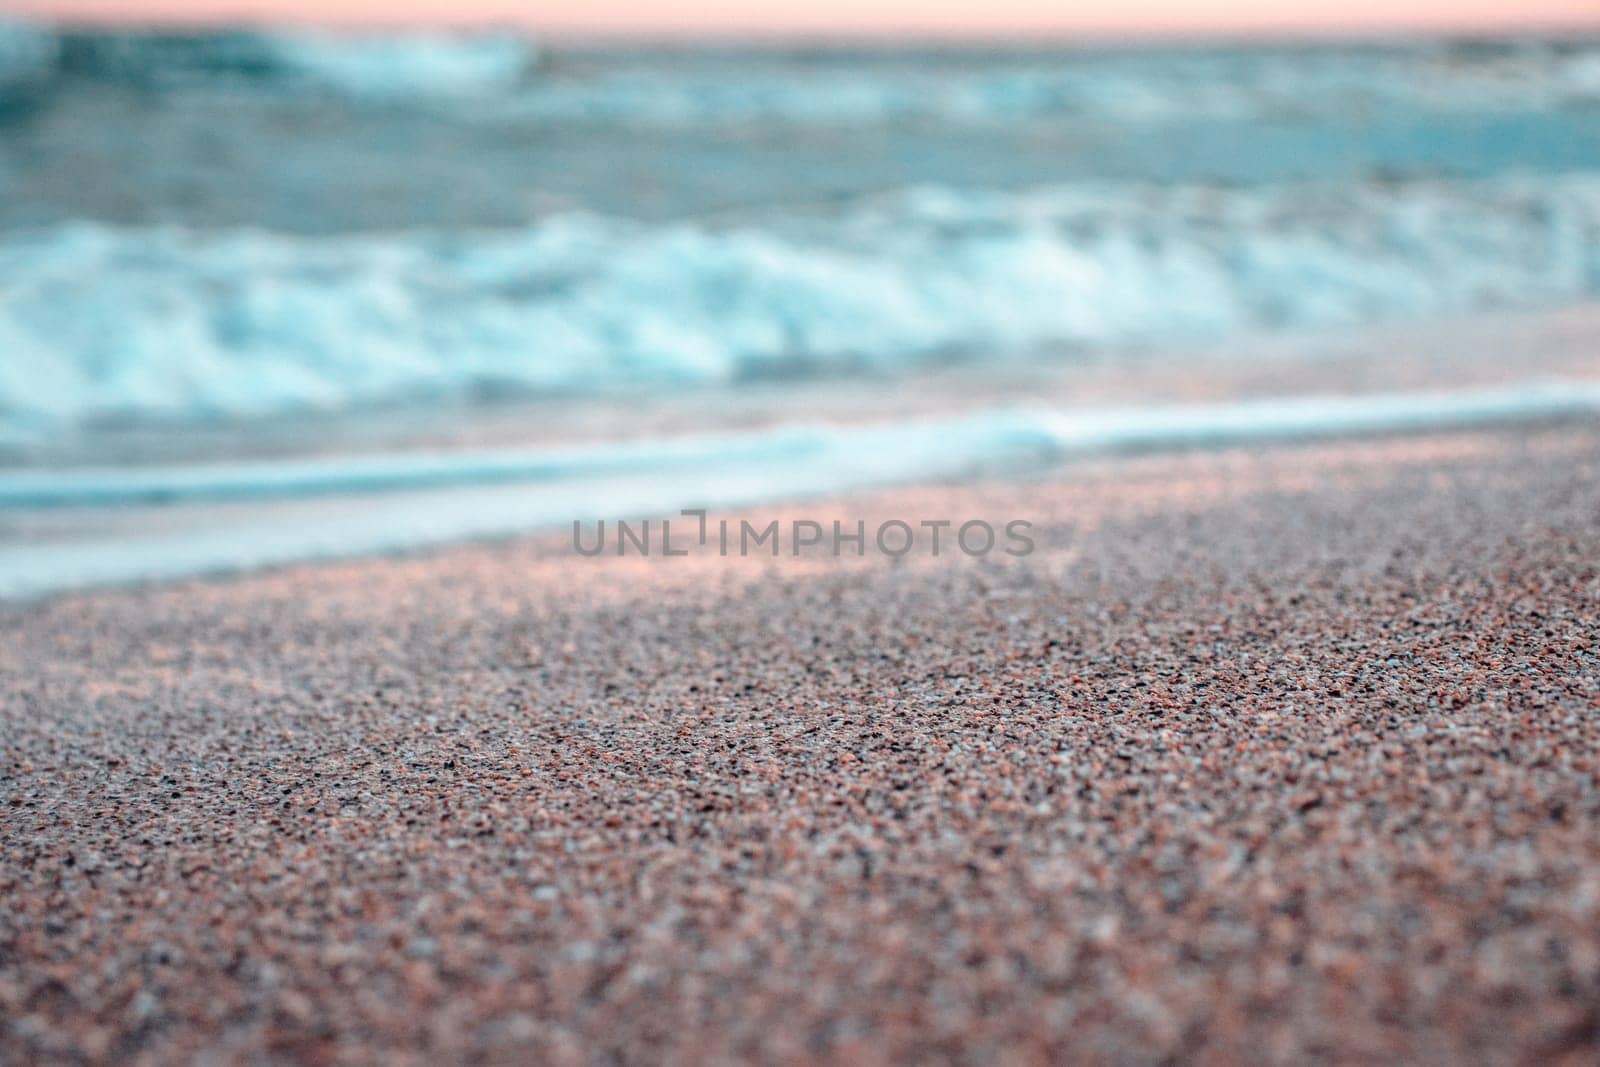 Close up sand beach and ocean waves concept photo. Barcelona resort, blue sea. Front view photography by _Nataly_Nati_